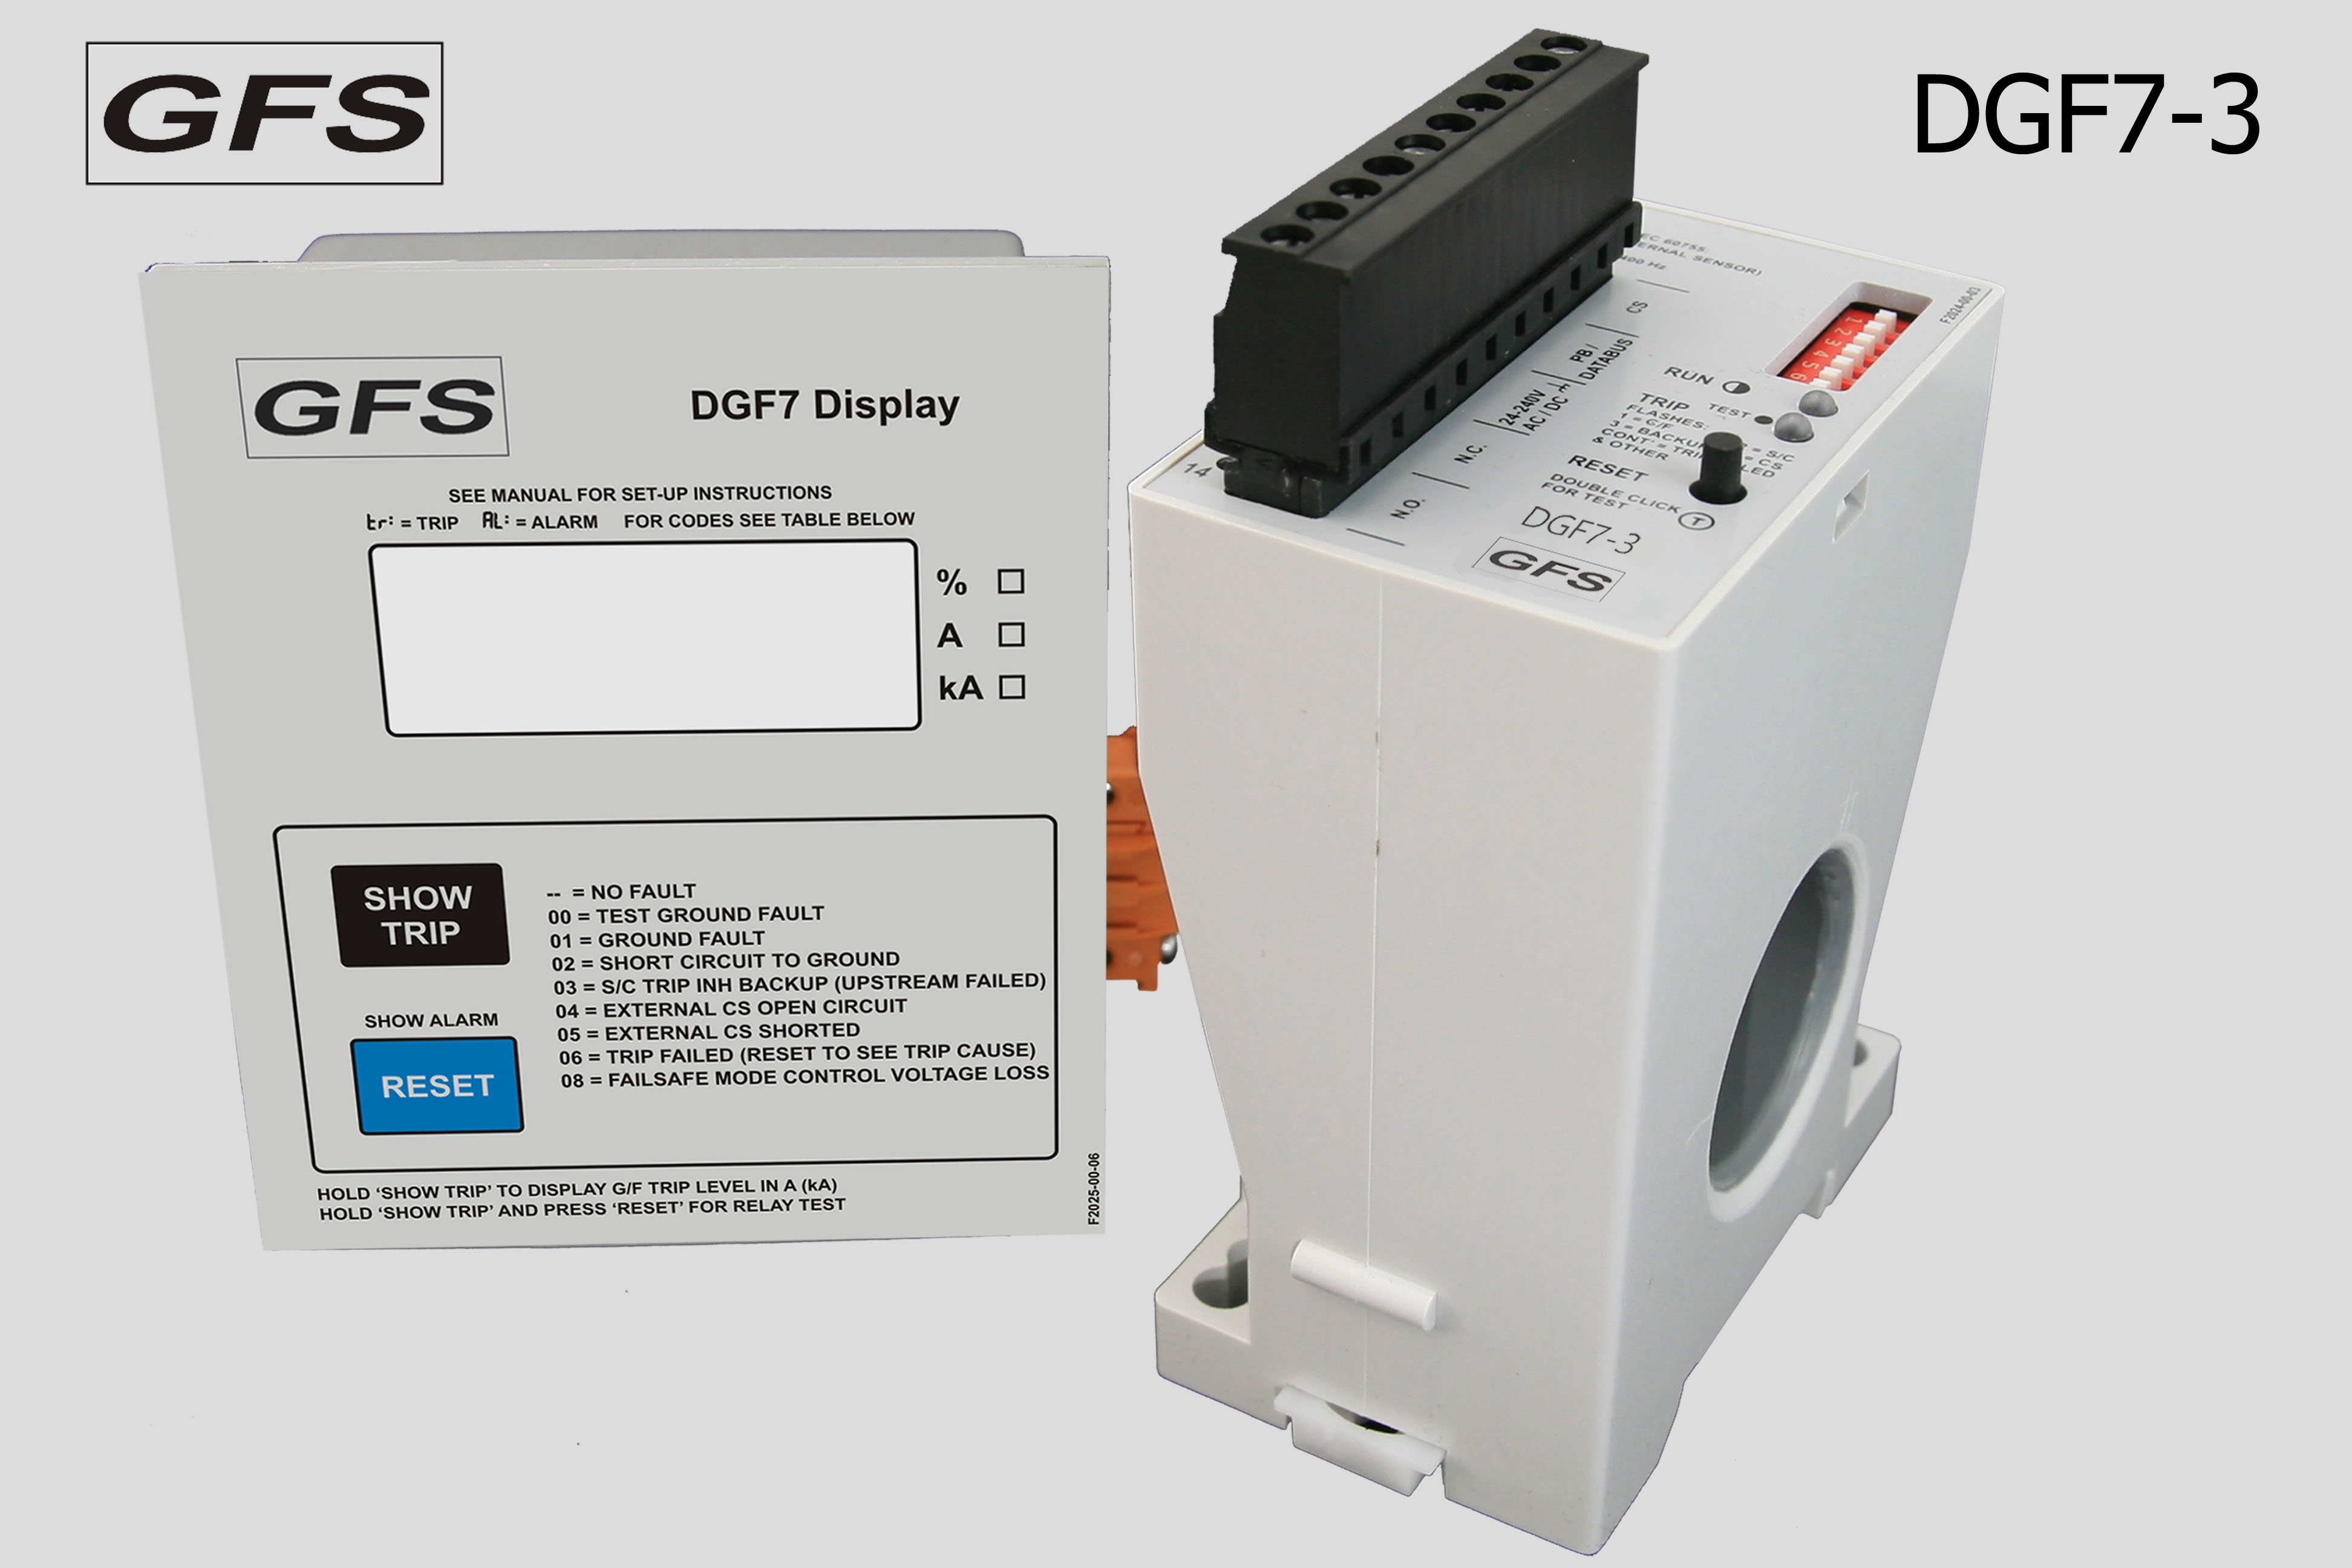 Ground Fault protection unit: DGF7-3 and display